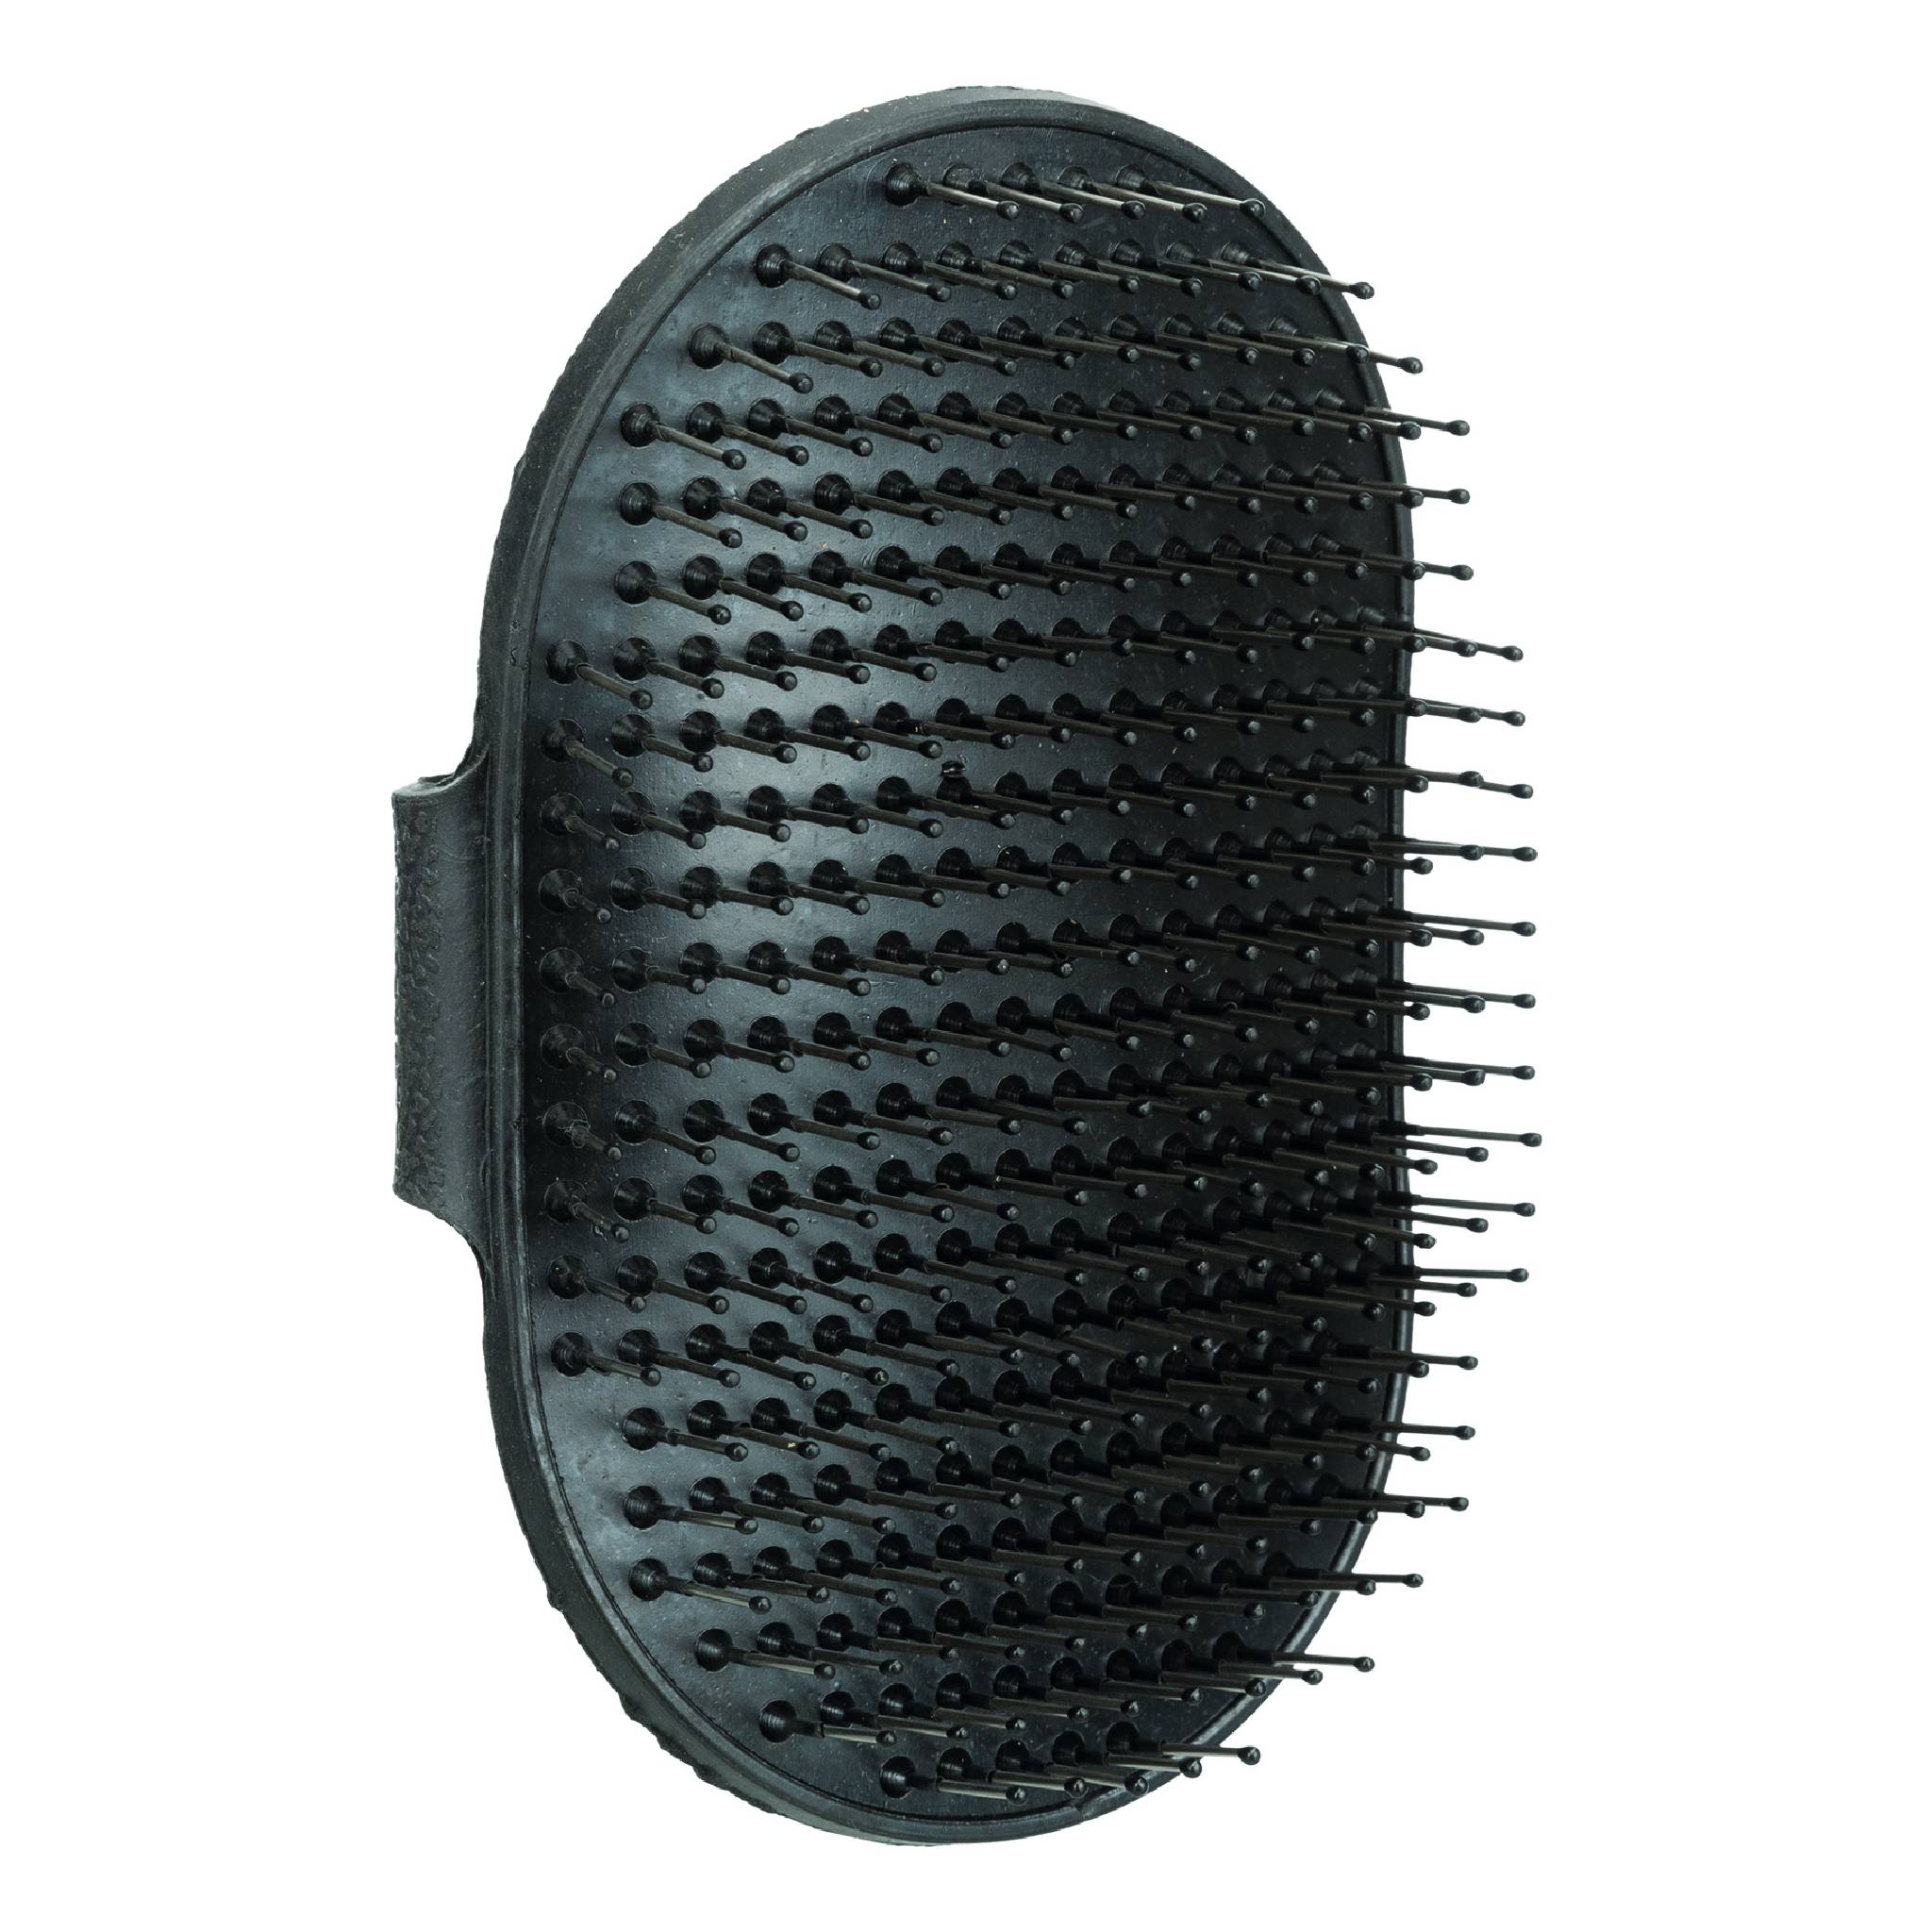 Care Brush with Wire Bristles